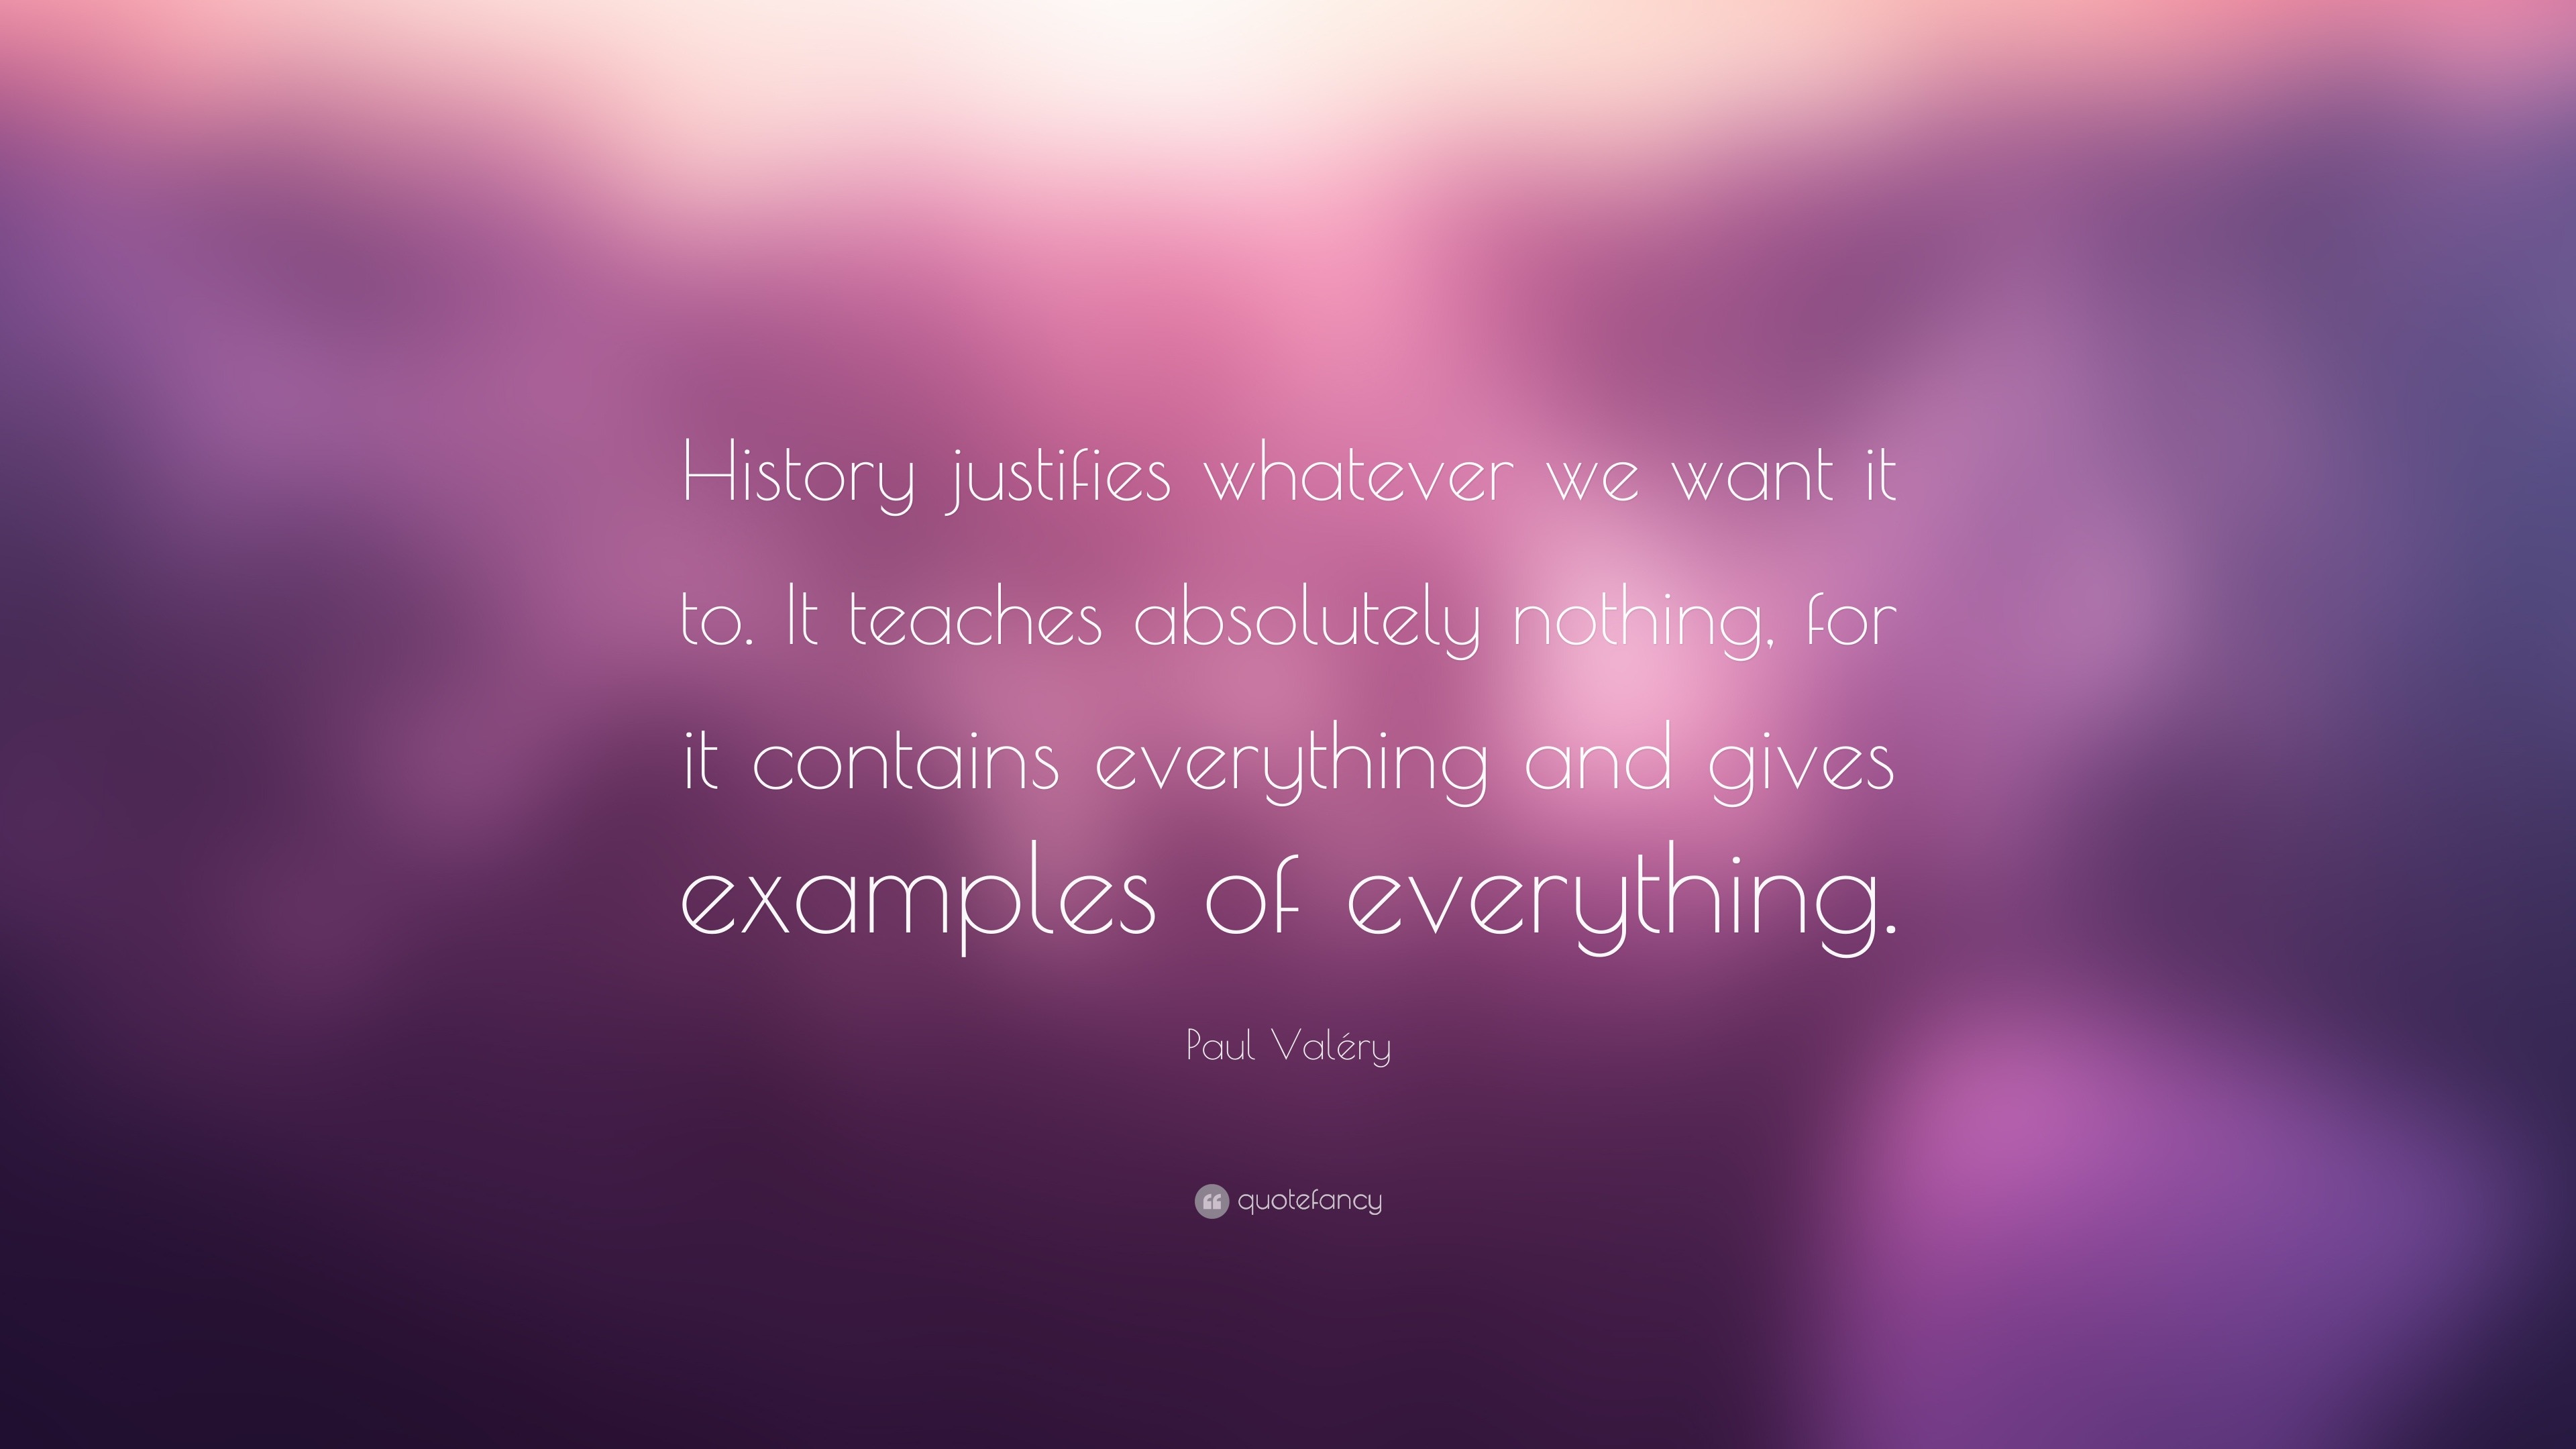 Paul Valéry Quote “history Justifies Whatever We Want It To It